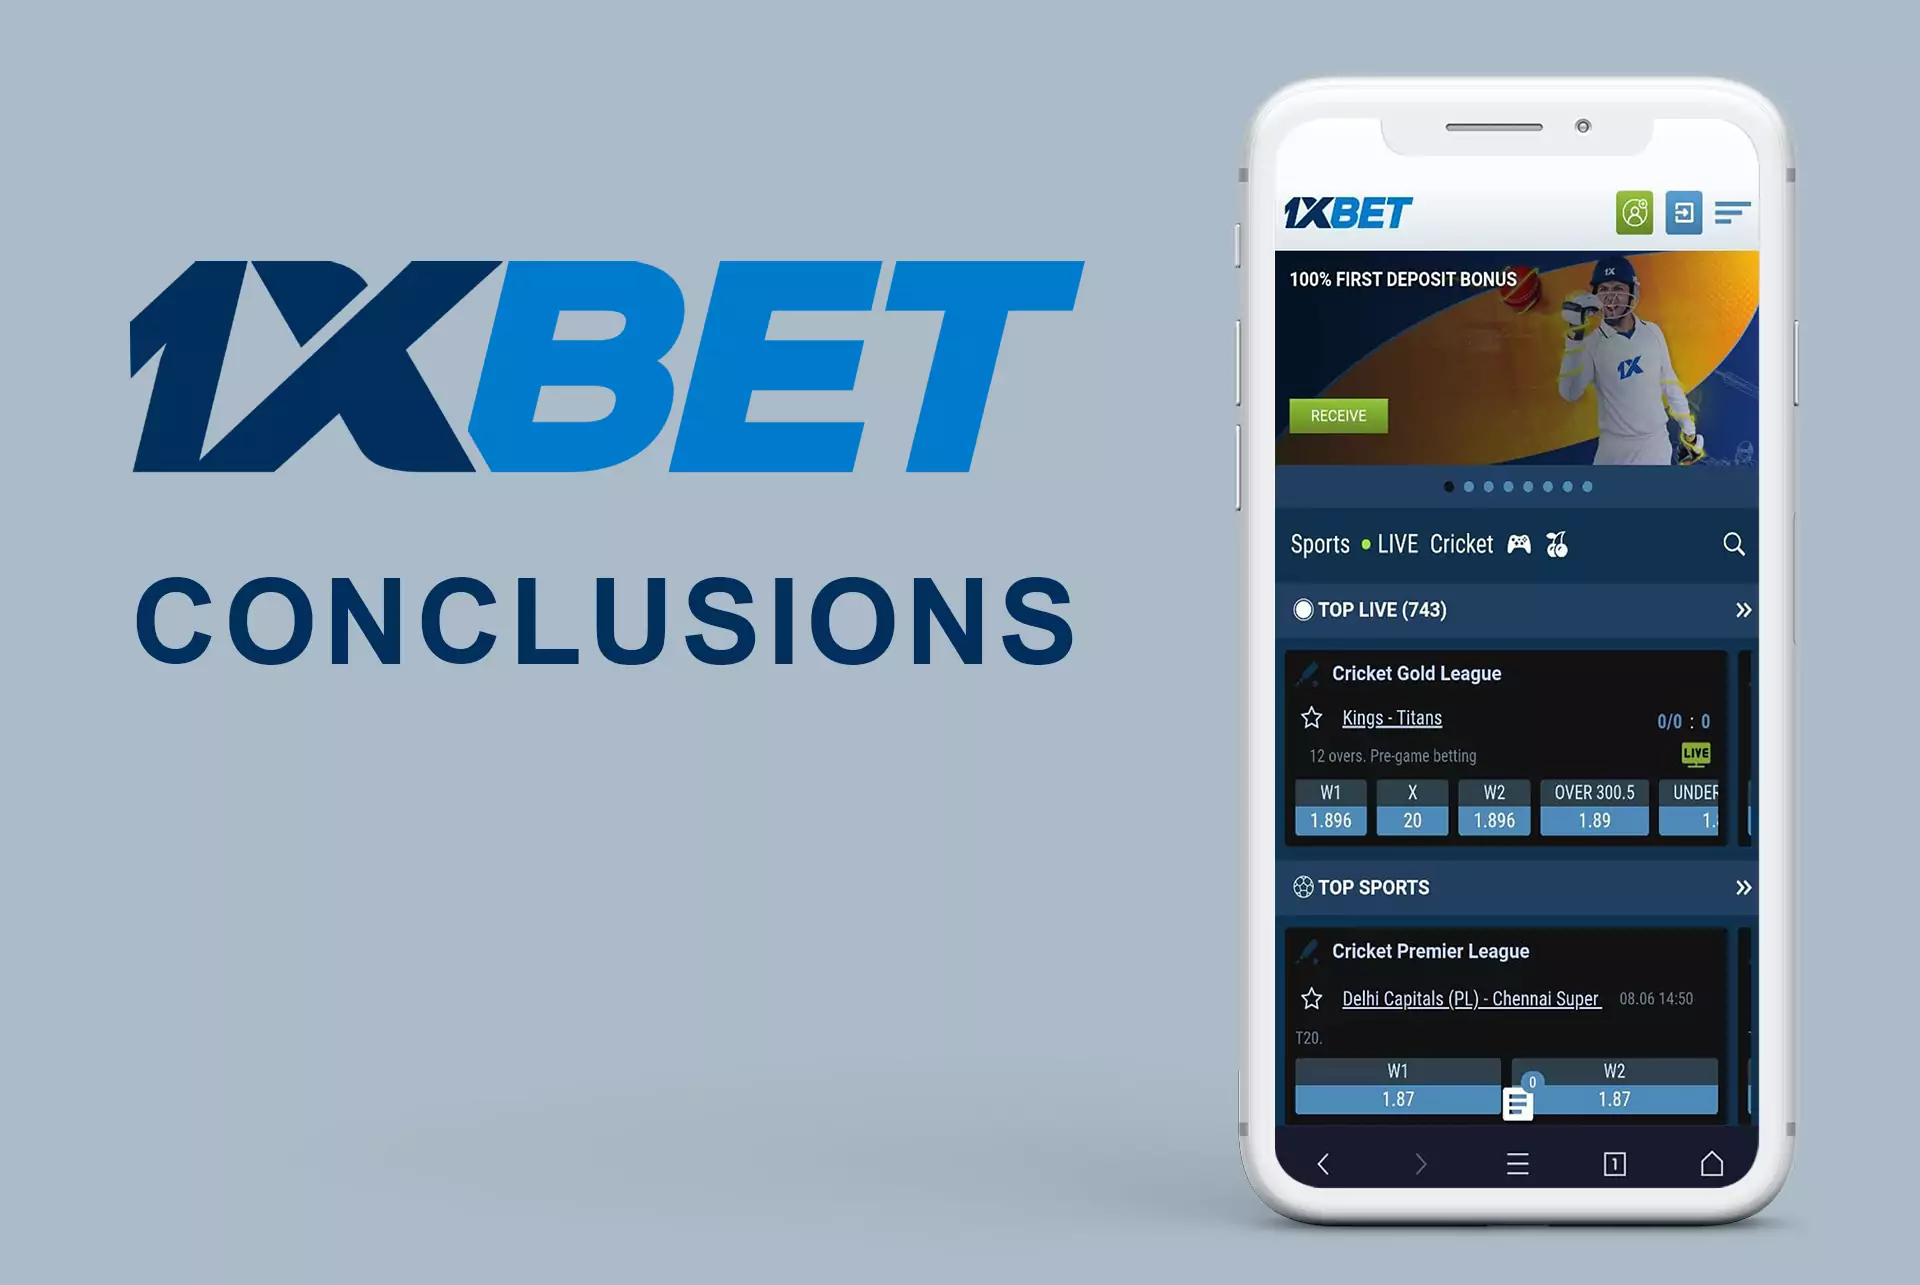 How To Lose Money With legal cricket betting app